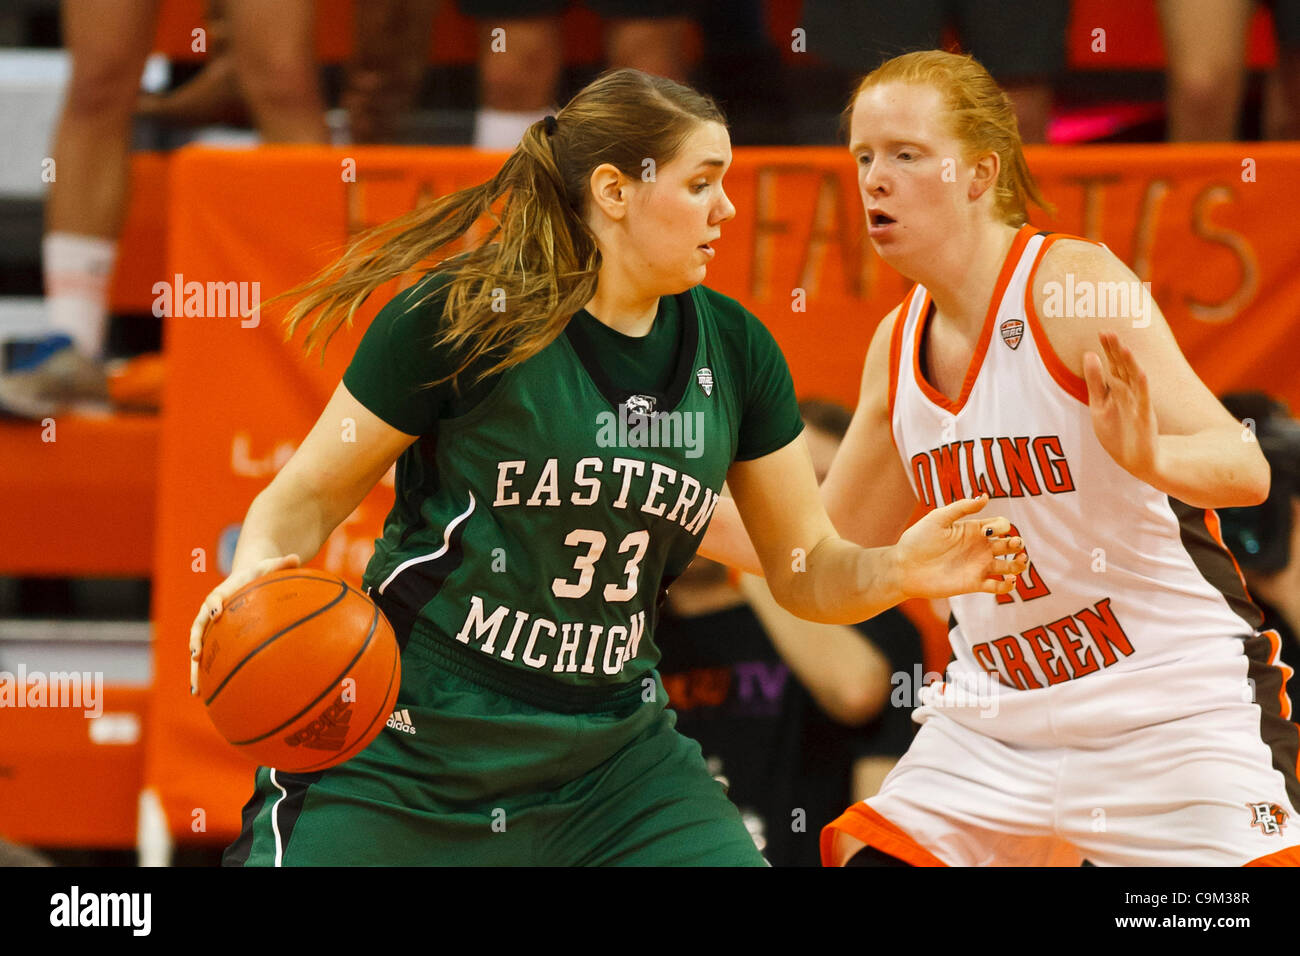 Jan. 22, 2012 - Bowling Green, Ohio, U.S - Eastern Michigan forward Olivia Fouty (33) tries to drive against Bowling Green forward Danielle Havel (42) during second-half game action.  The Bowling Green Falcons, of the Mid-American Conference East Division, defeated the Eastern Michigan Eagles, of th Stock Photo